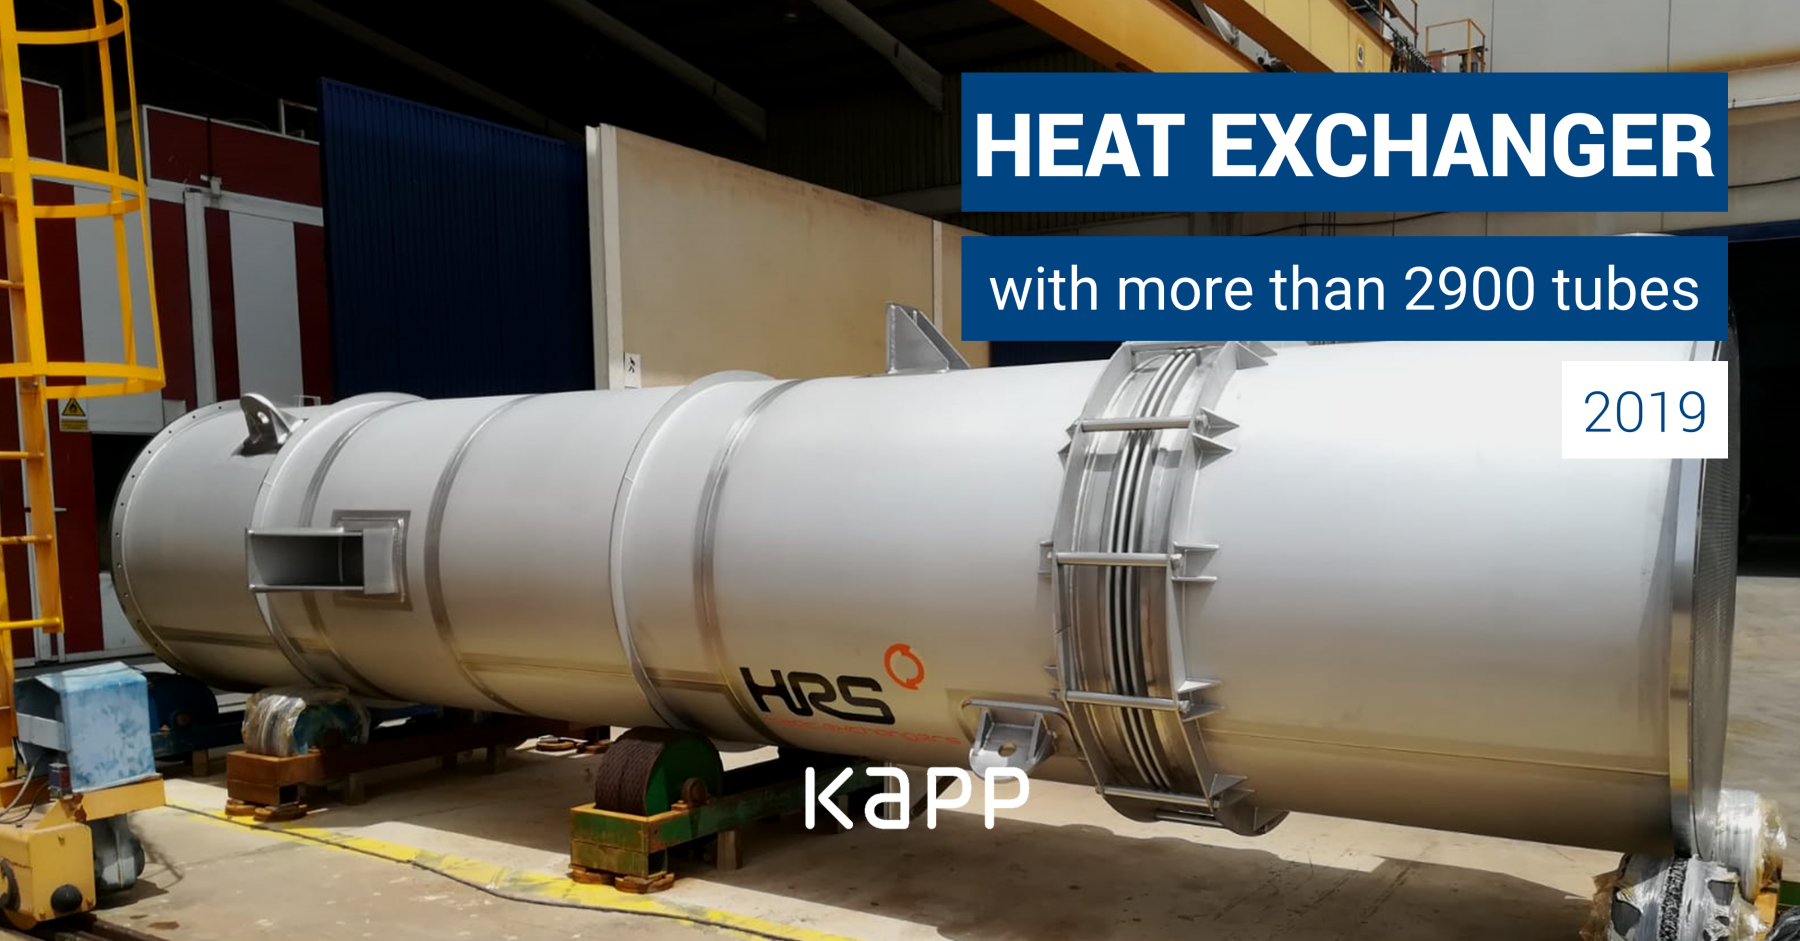 2019 Heat Exchanger with more than 2900 tubes 2